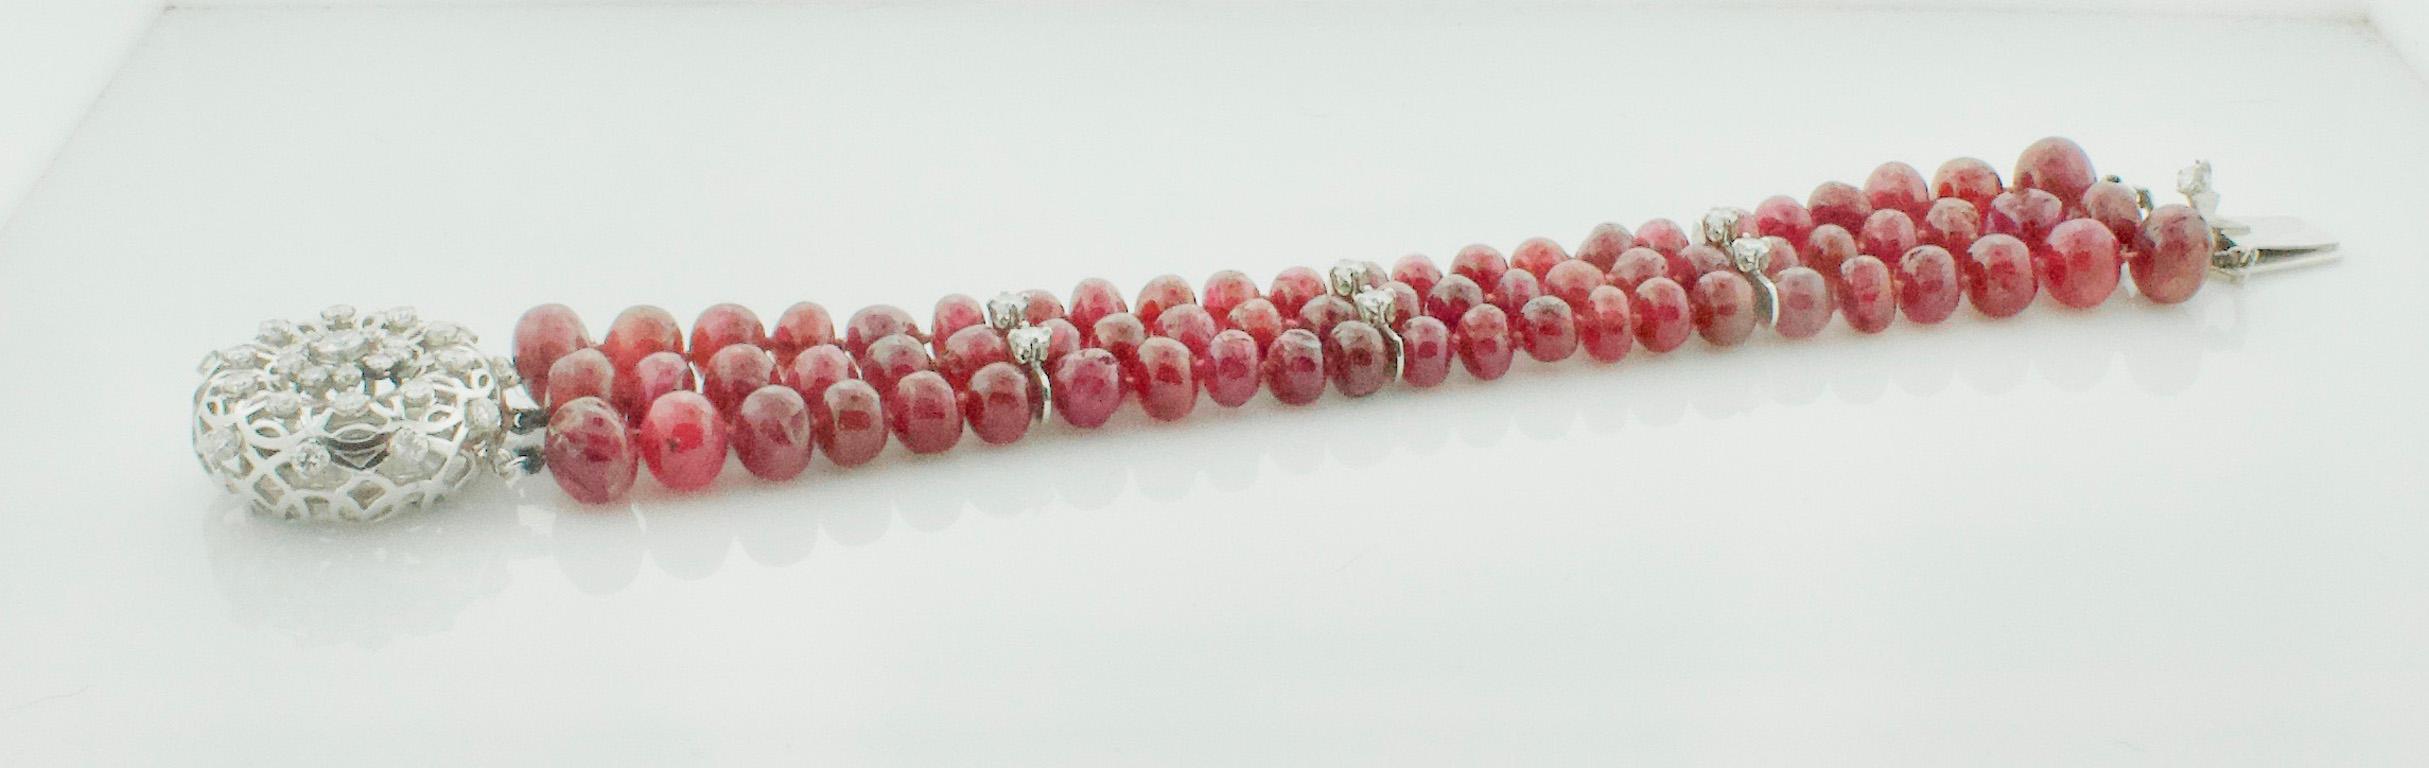 225 Carats Ruby Bead and Diamond Bracelet in White Gold Circa 1950's For Sale 3